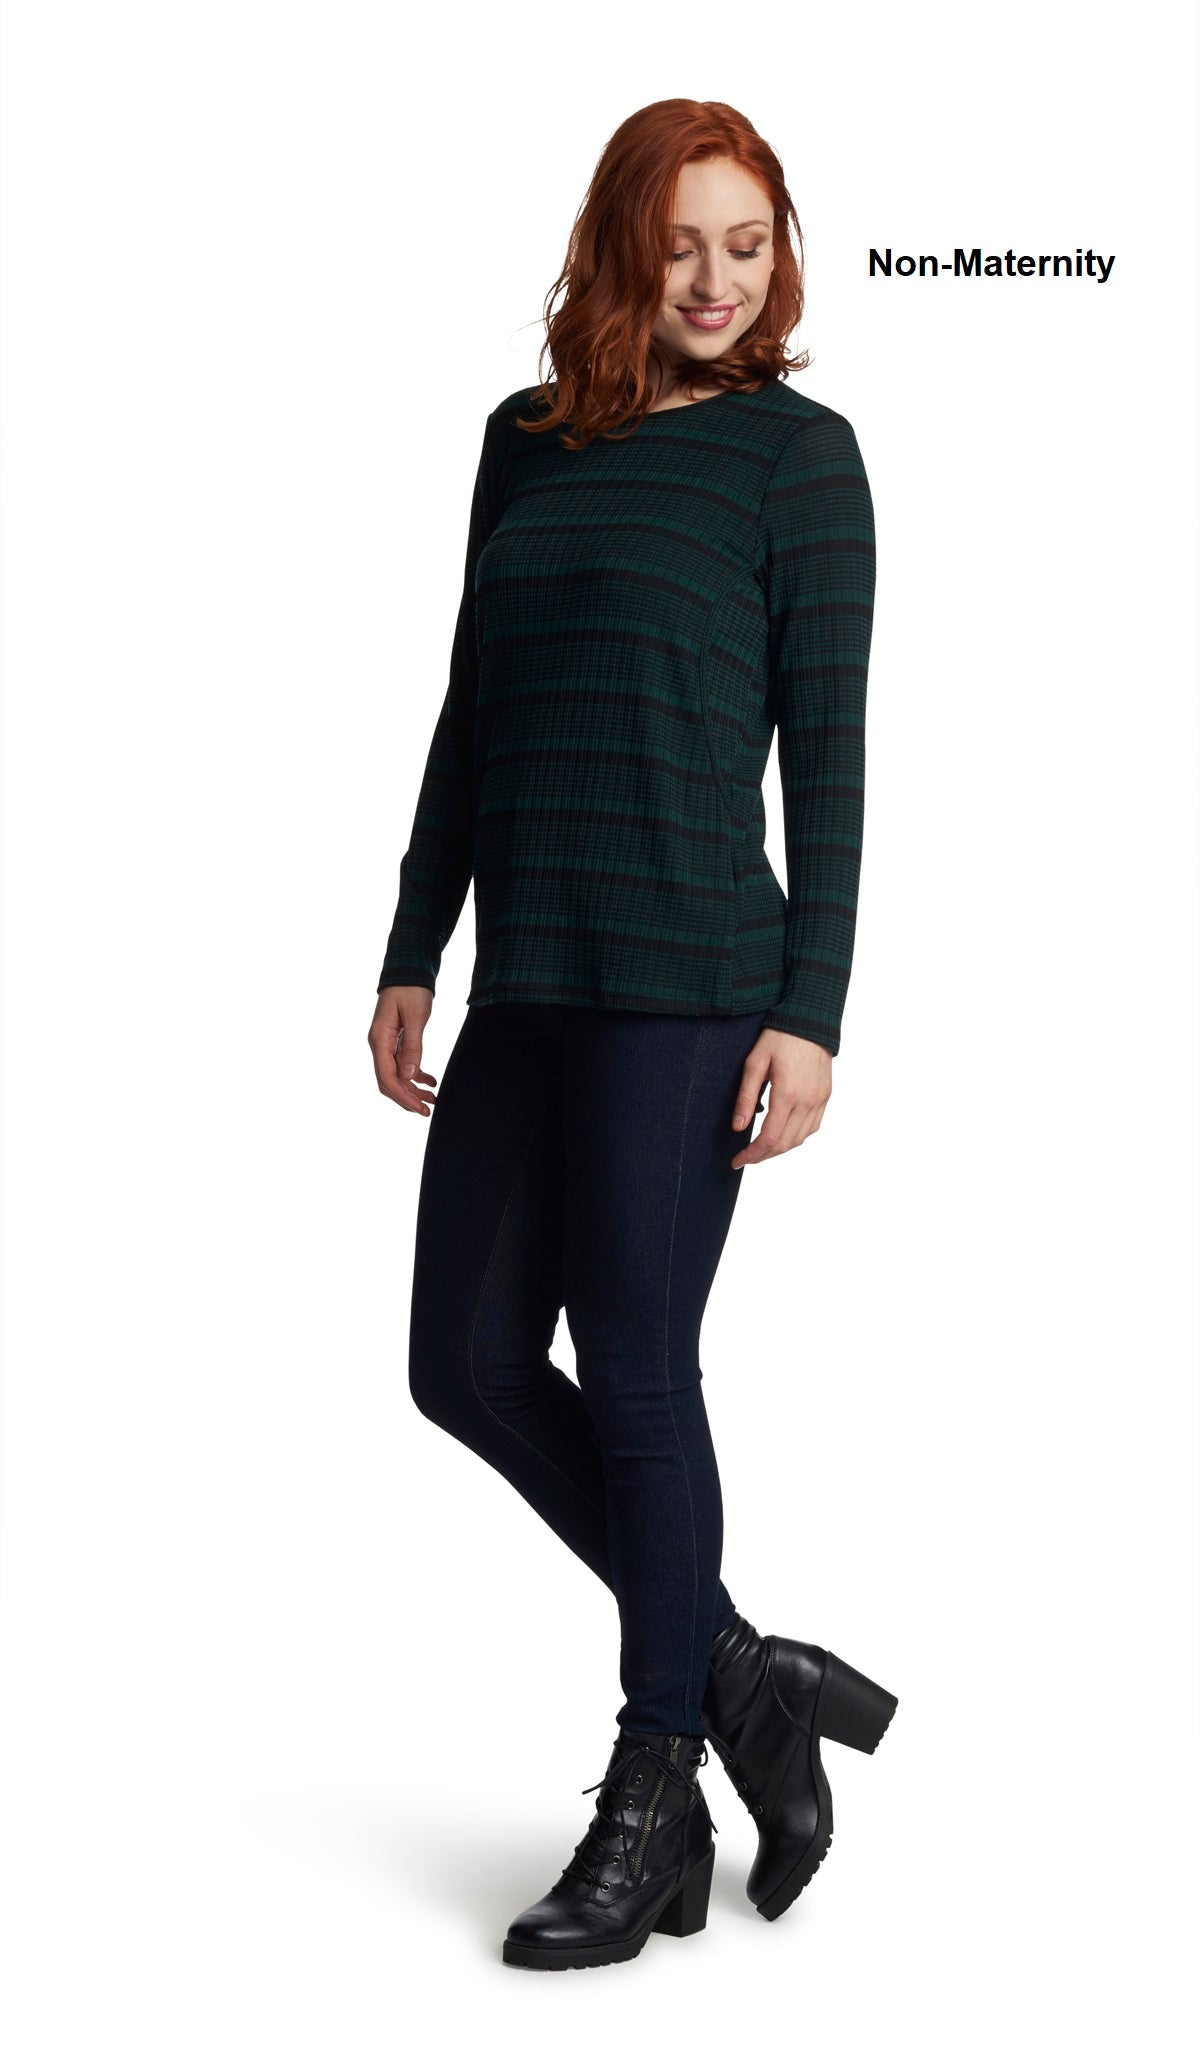 Hunter Stripe Ashley sweater worn by woman as non-maternity style.